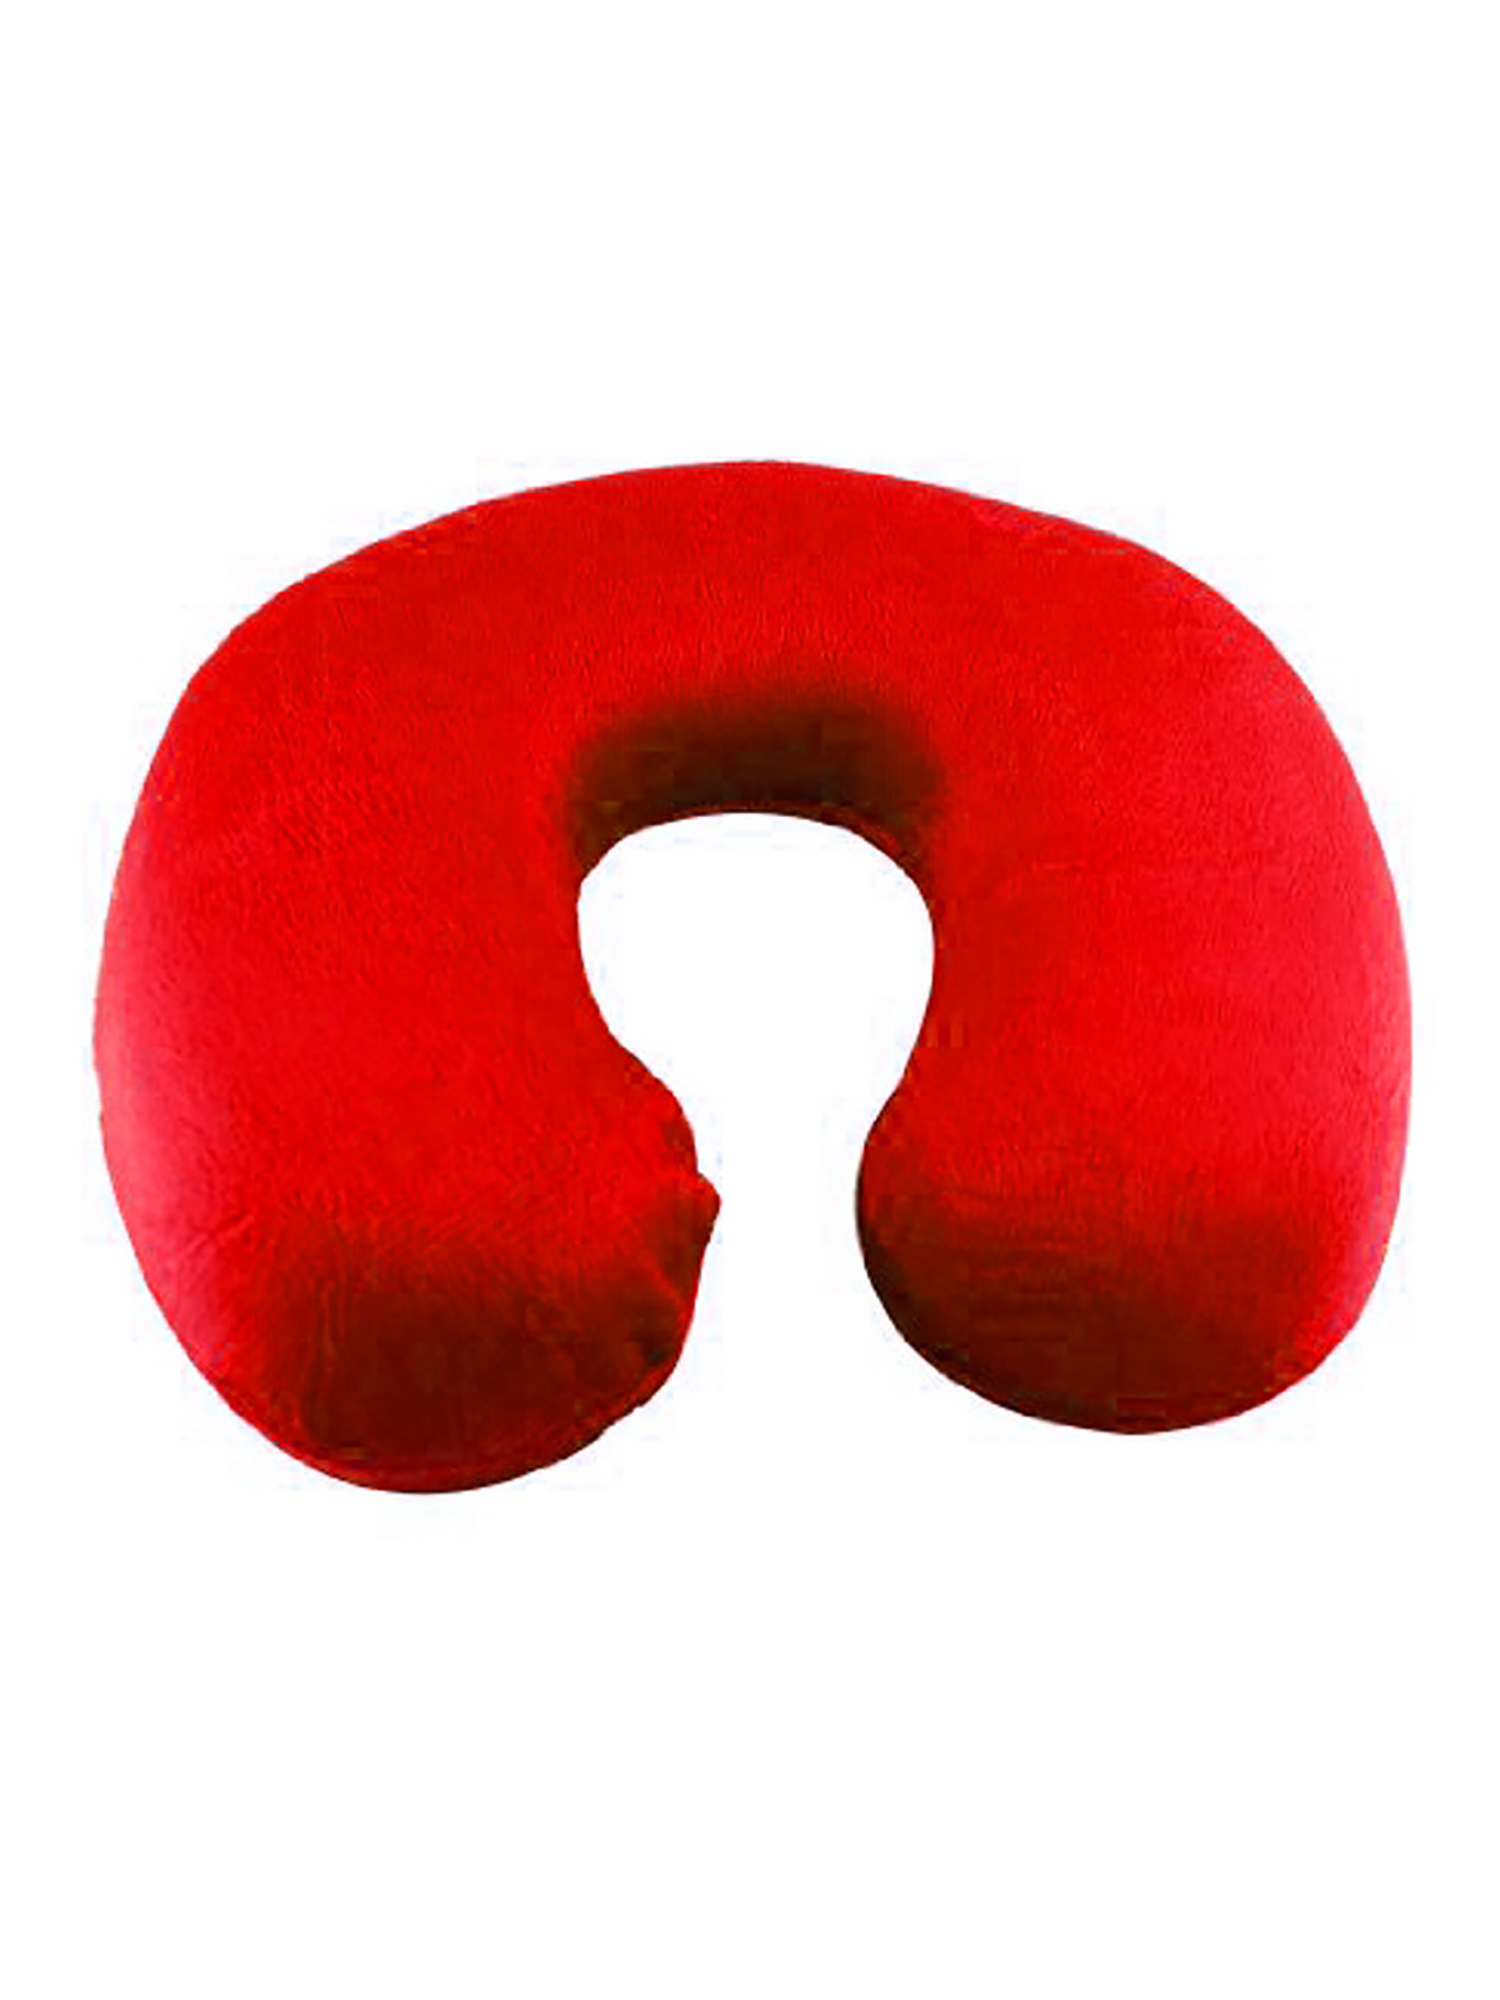 Travel Pillow Memory Foam Neck Cushion Support Rest Outdoors Car Flight - image 5 of 5